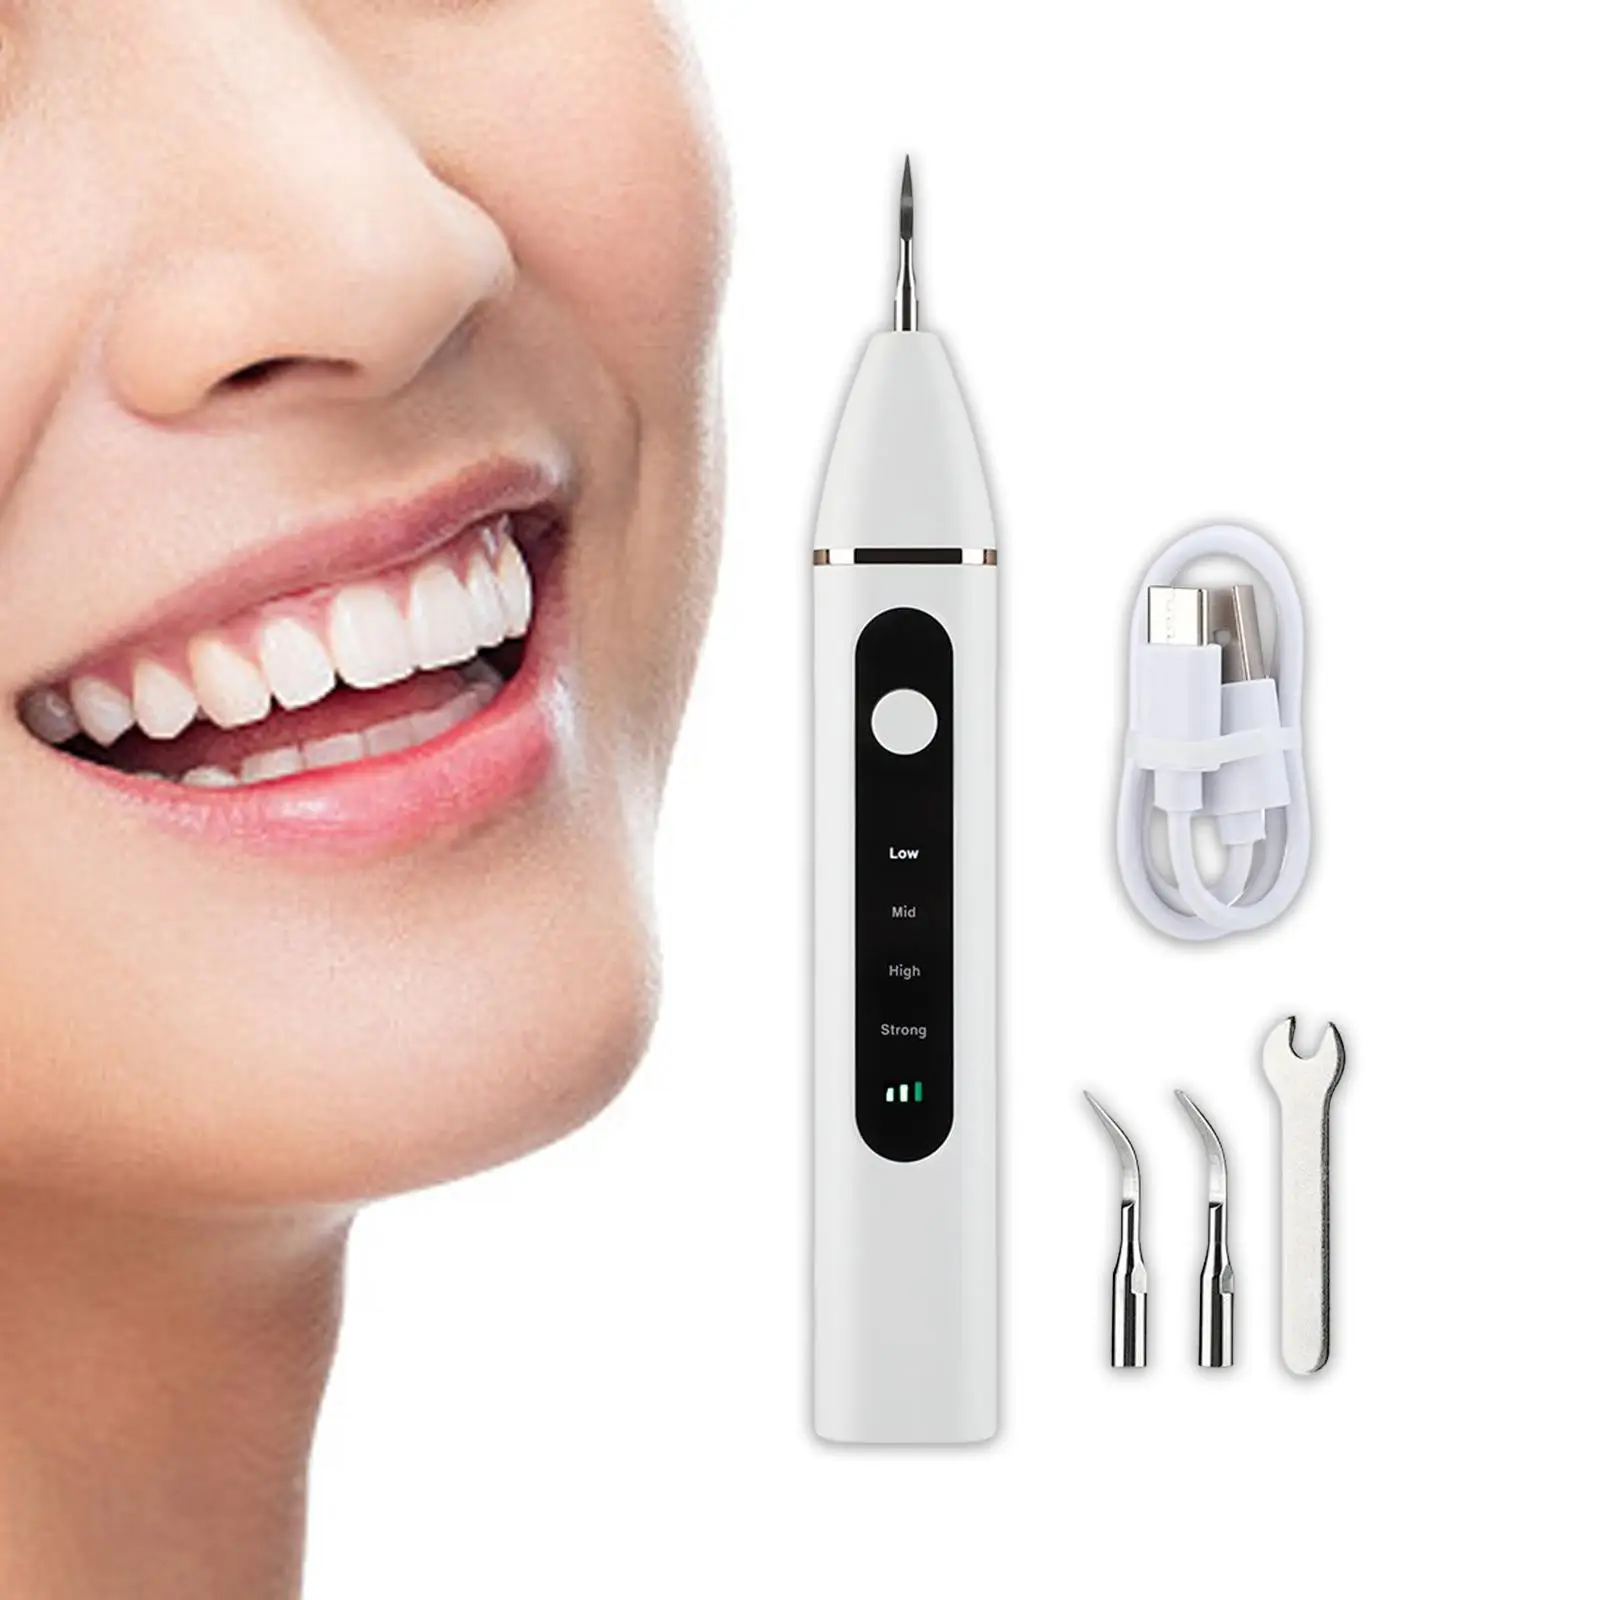 Cordless Visual Portable teeths Cleaner Picks Oral Irrigator tooth Cleaner for Home Travel